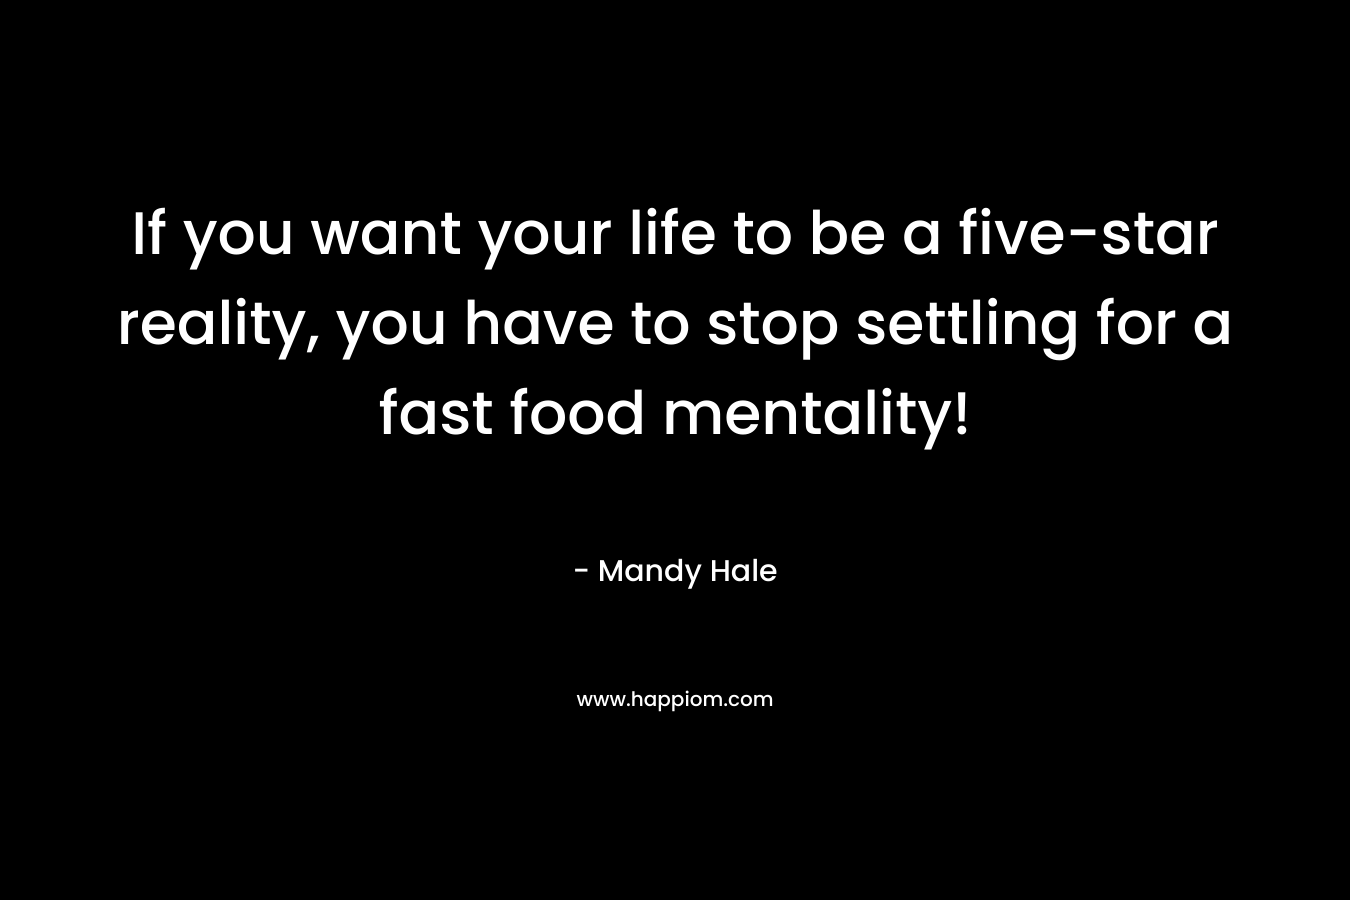 If you want your life to be a five-star reality, you have to stop settling for a fast food mentality! – Mandy Hale